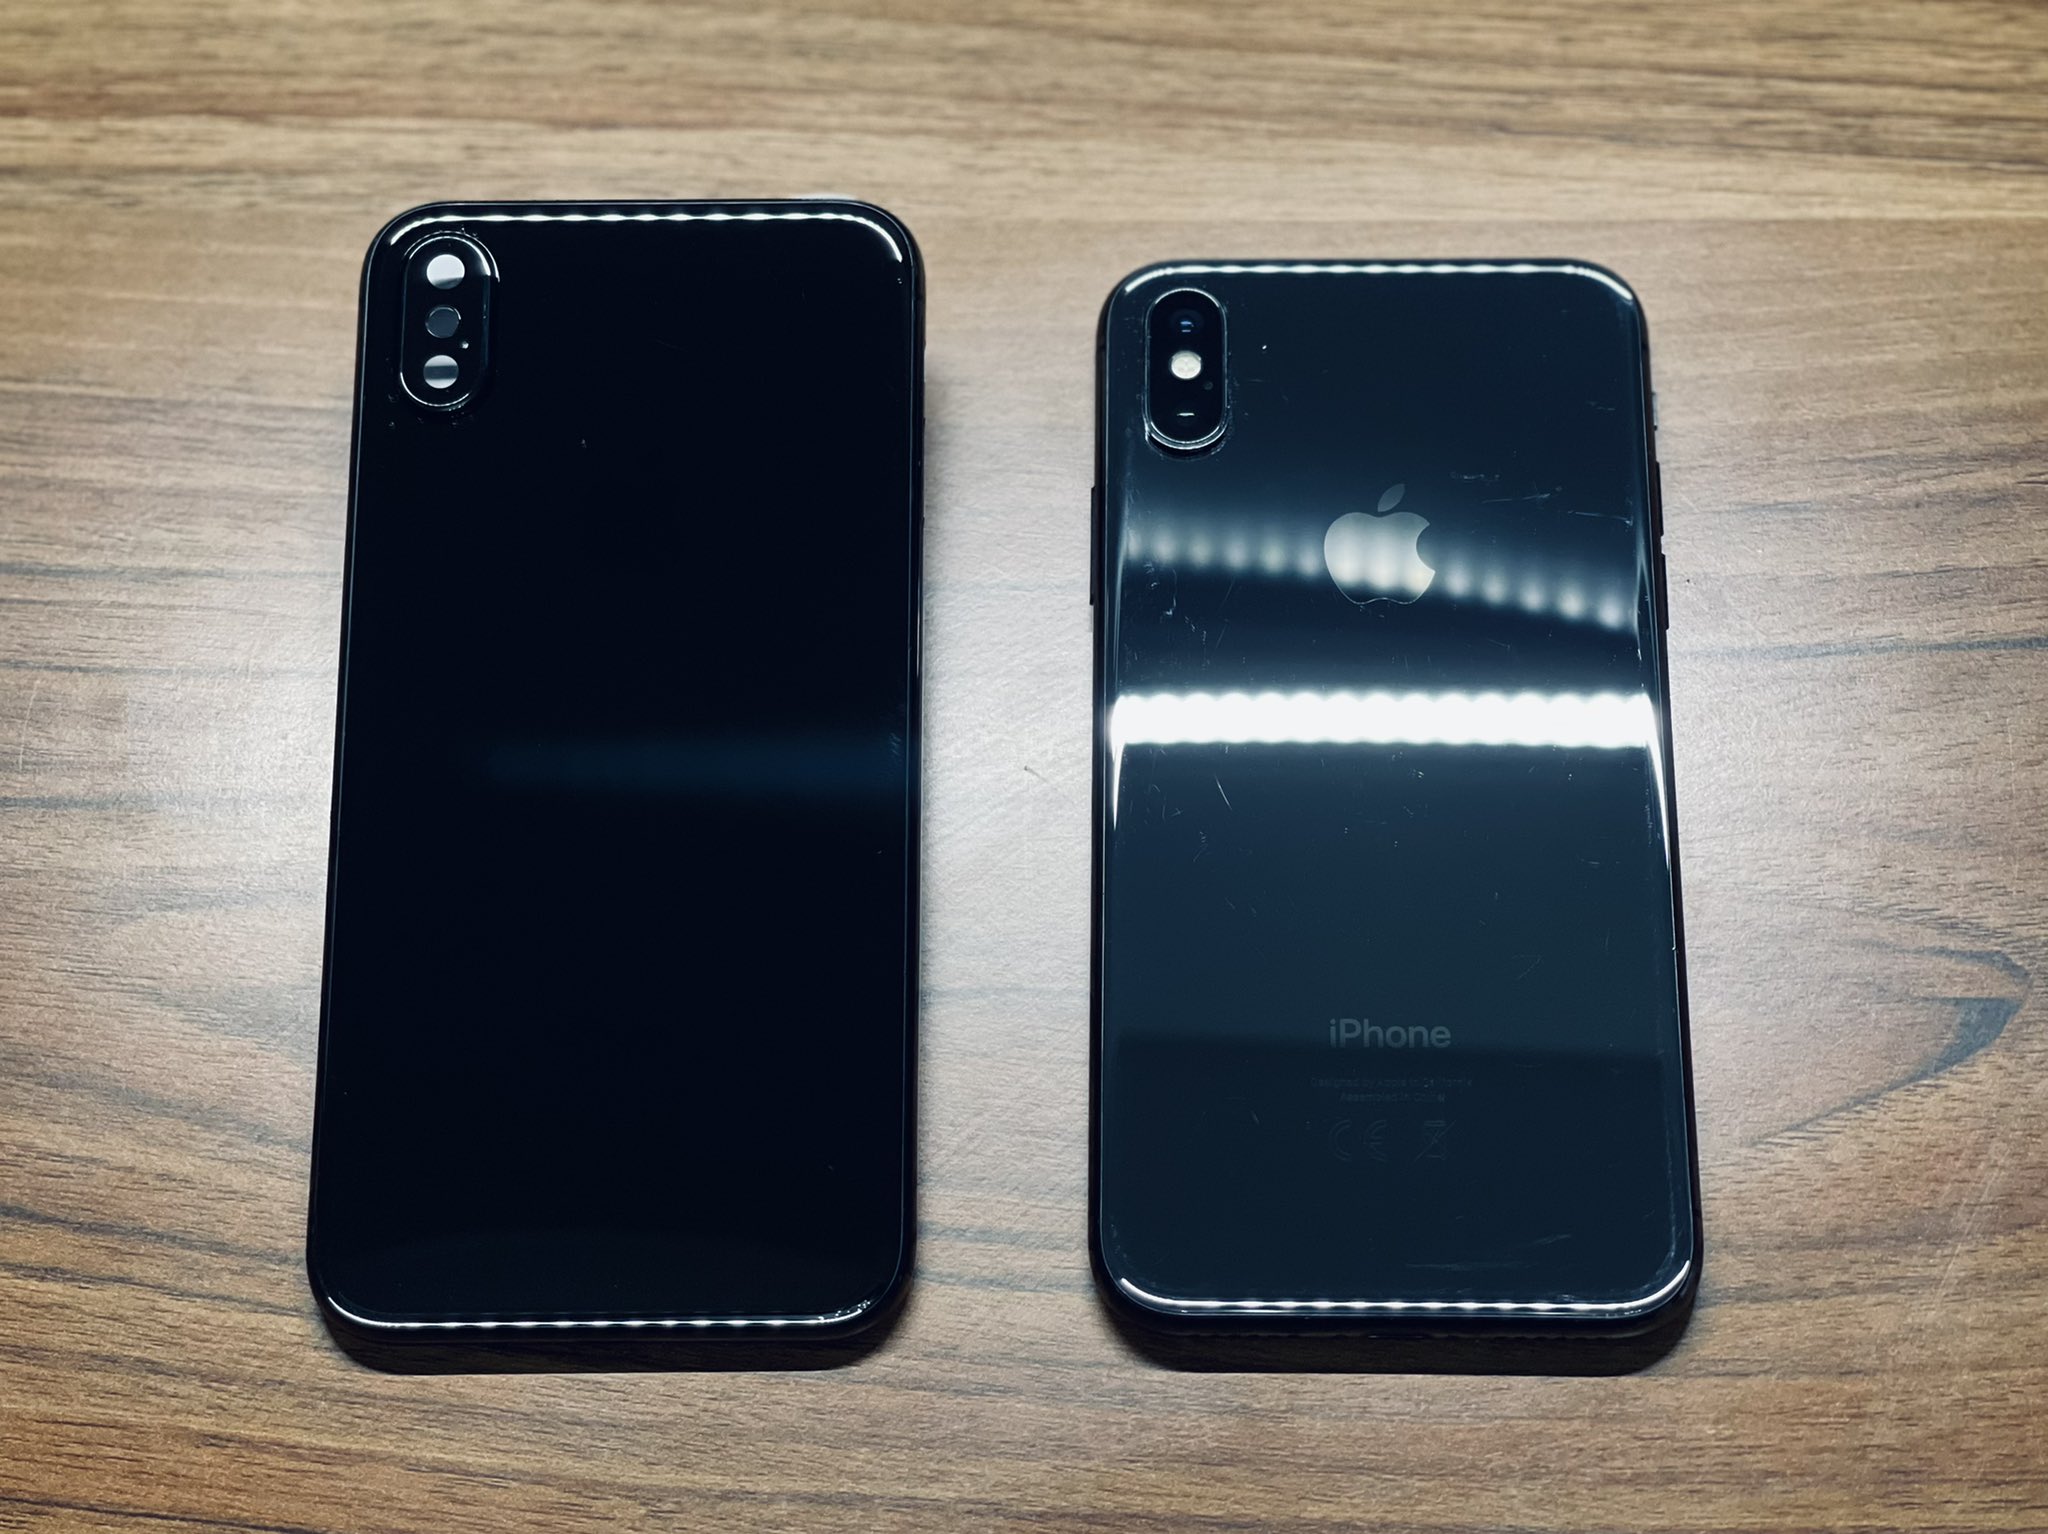 Download Photos of unreleased iPhone X prototype in Jet Black revealed - Wylsacom - Archyde